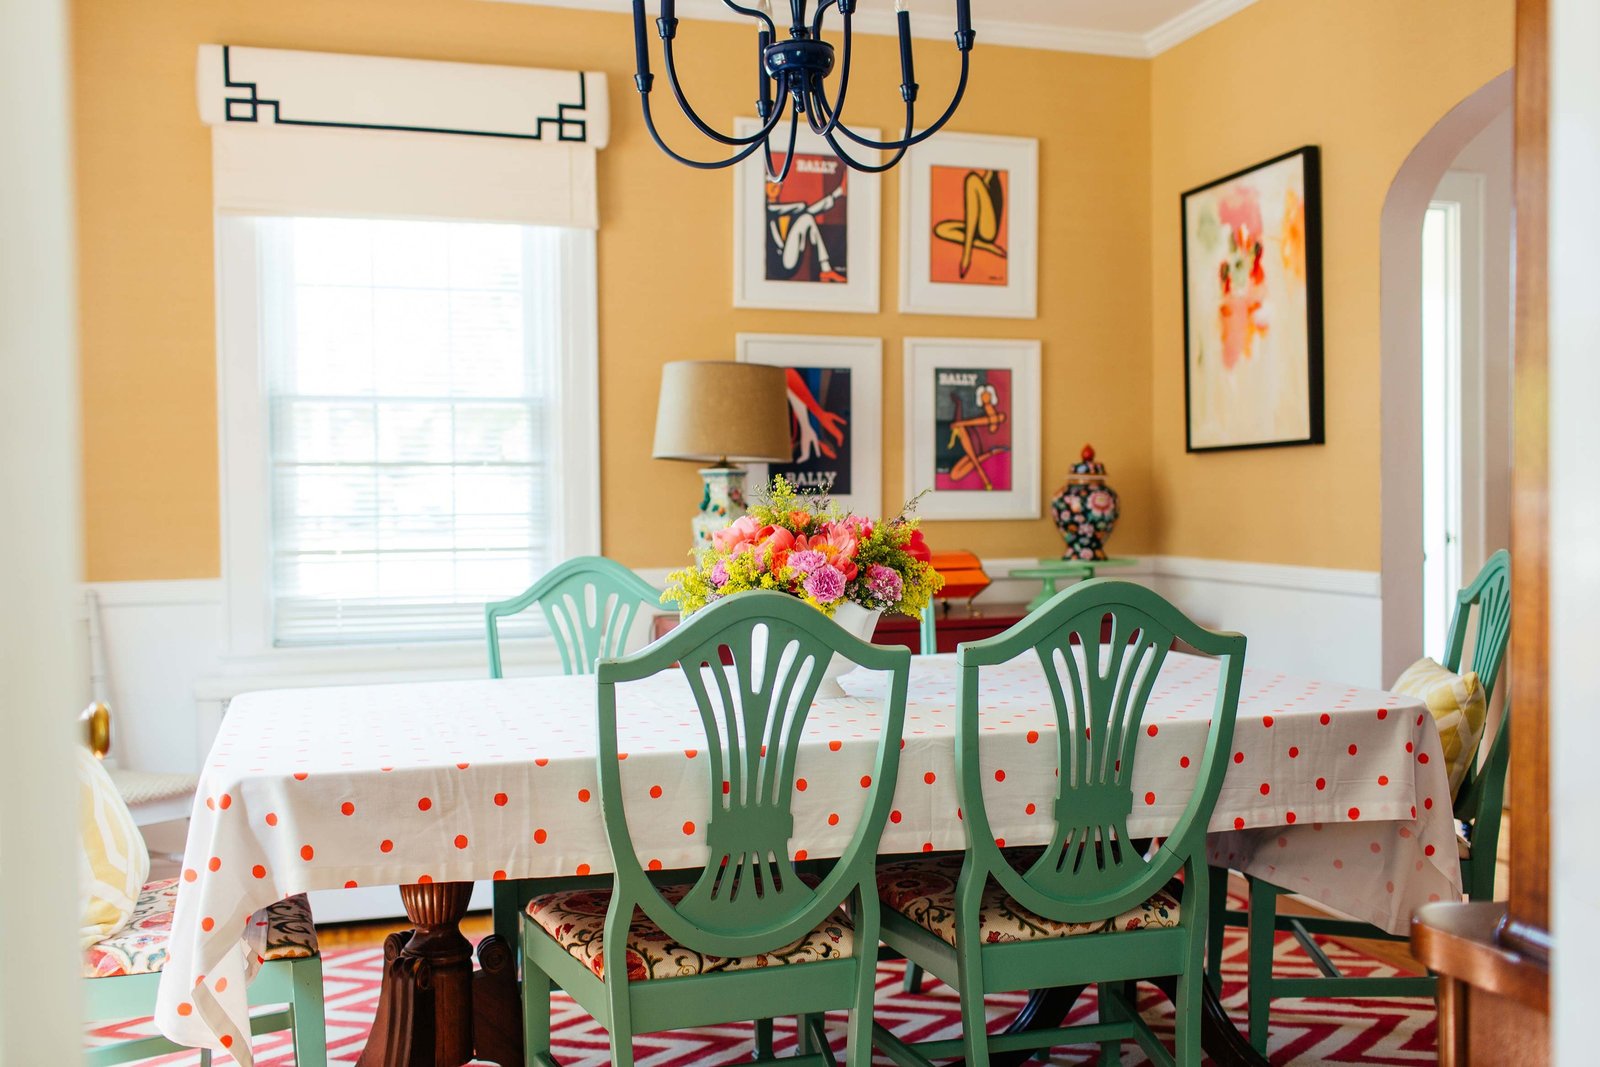 A colorfully decorated dining room in Westbury, NY.